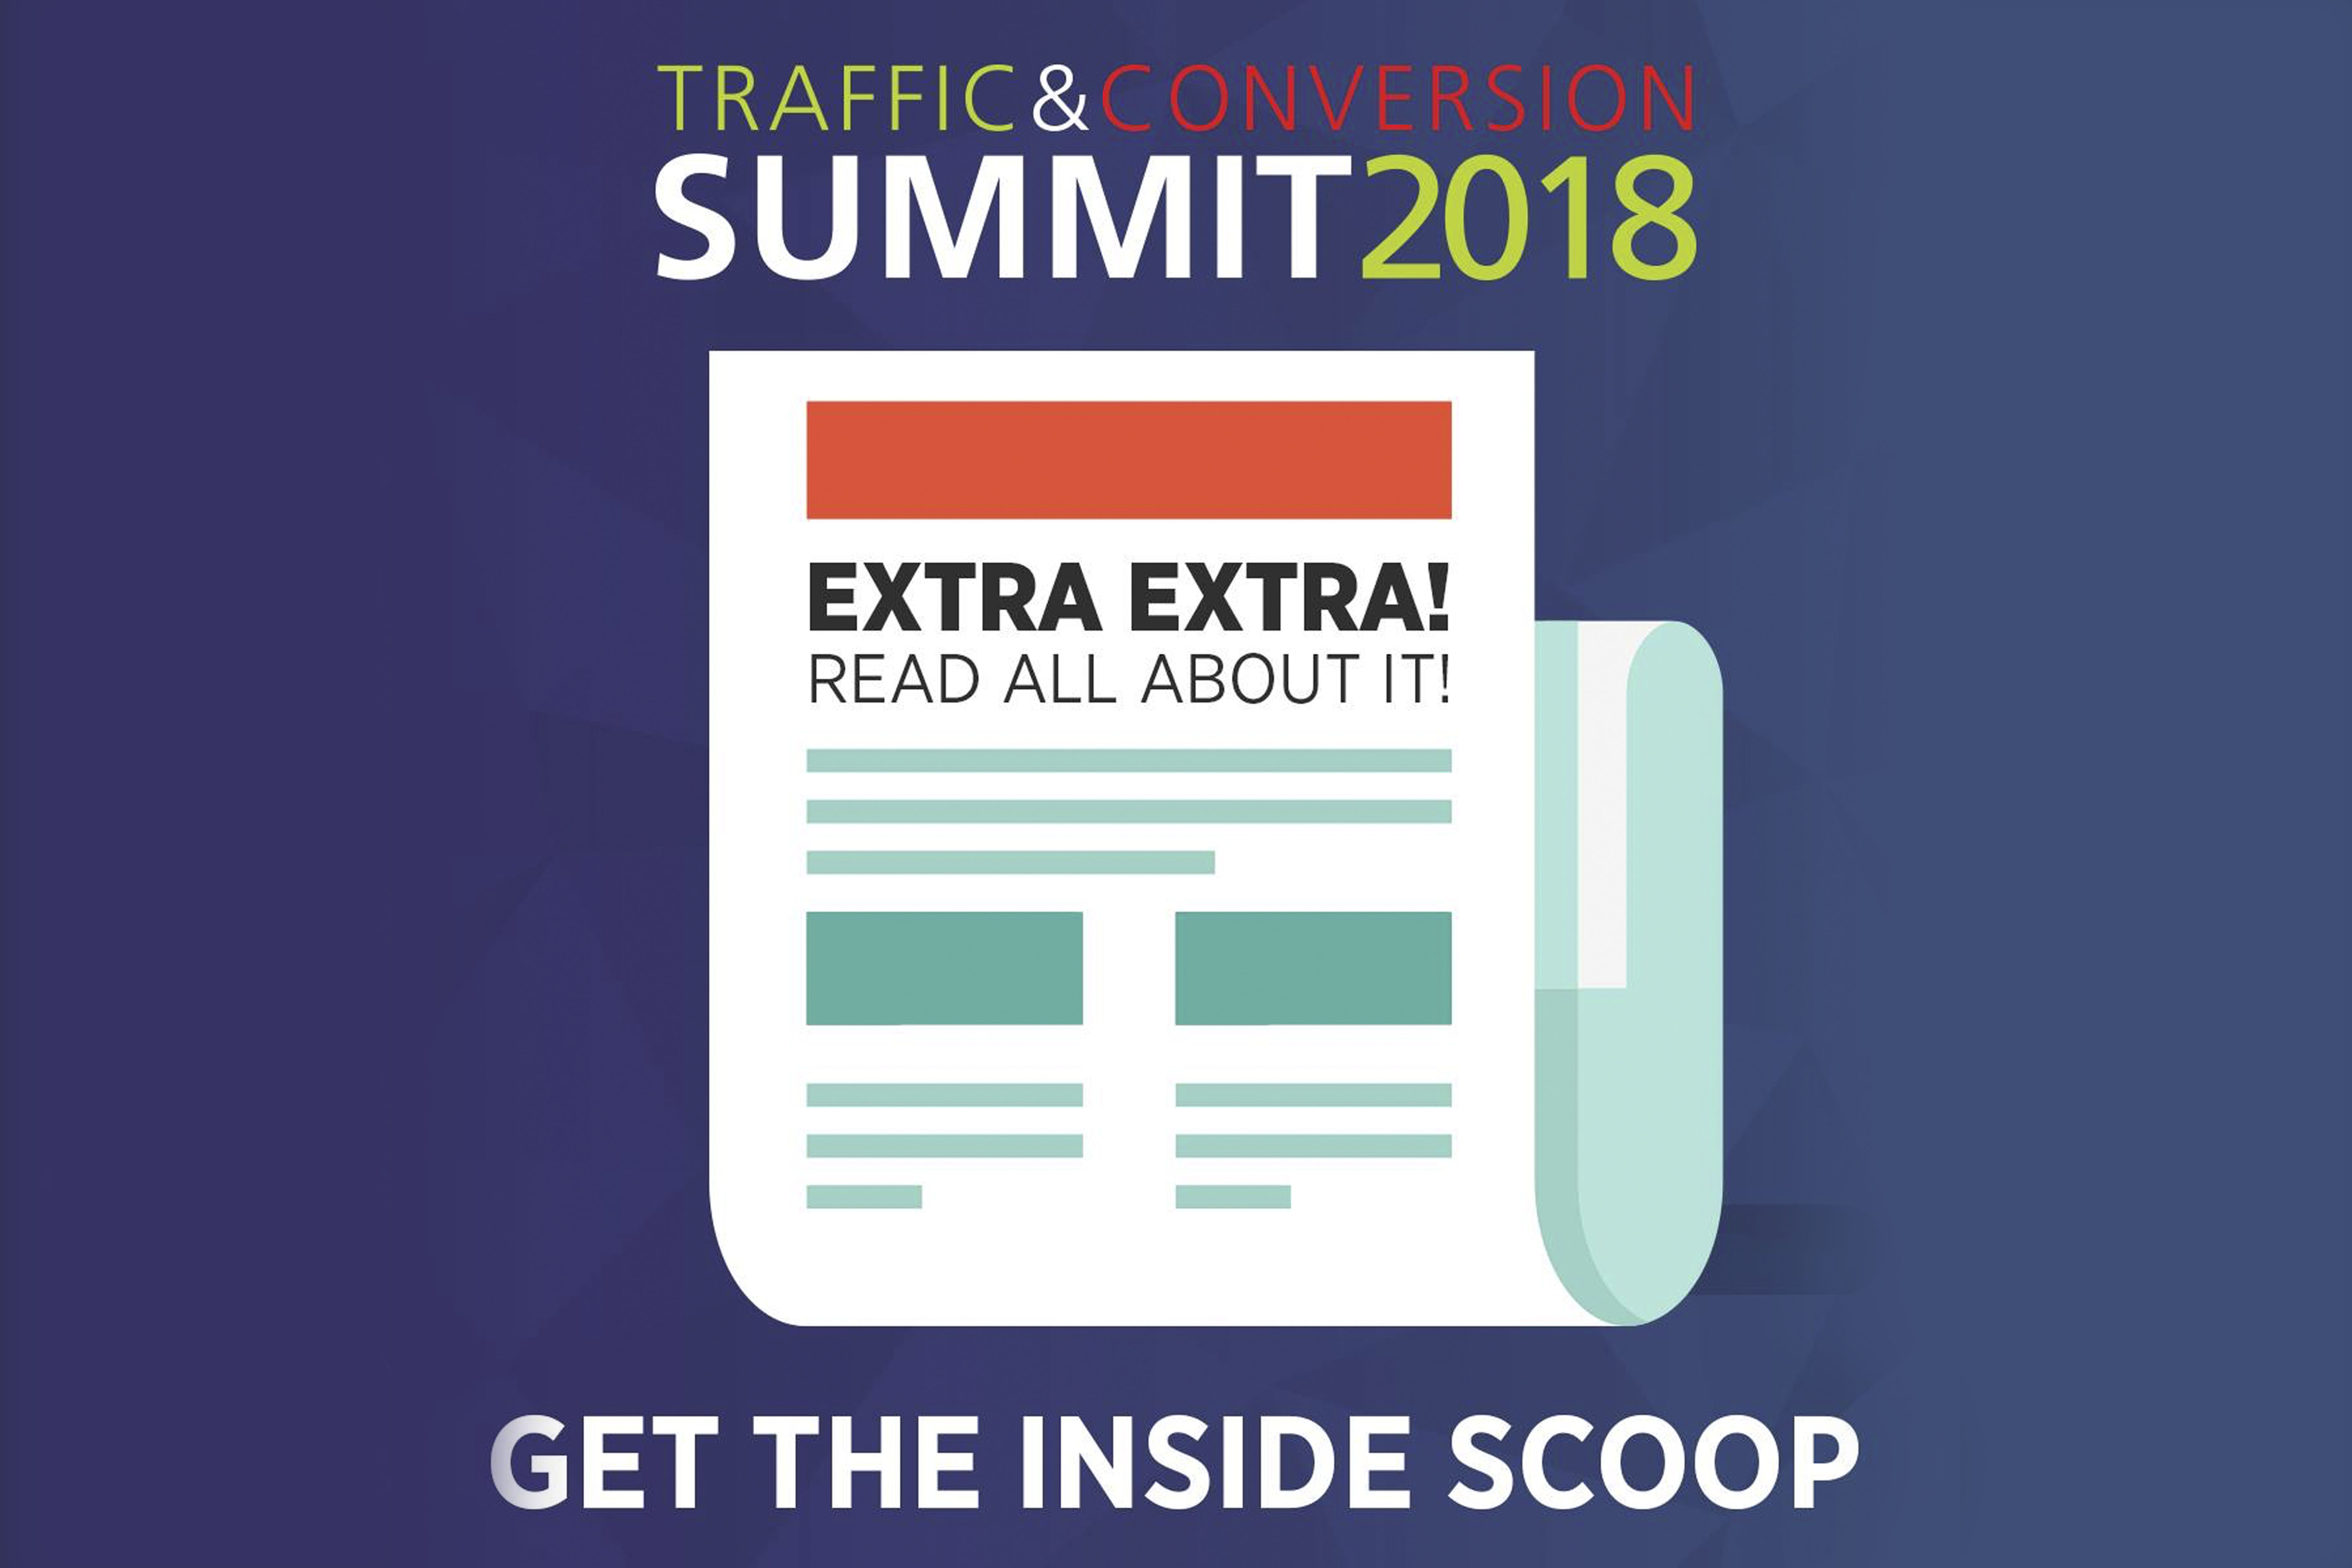 The Top 3 Takeaways from Traffic & Conversion Summit 2018. Skeptics Welcome.